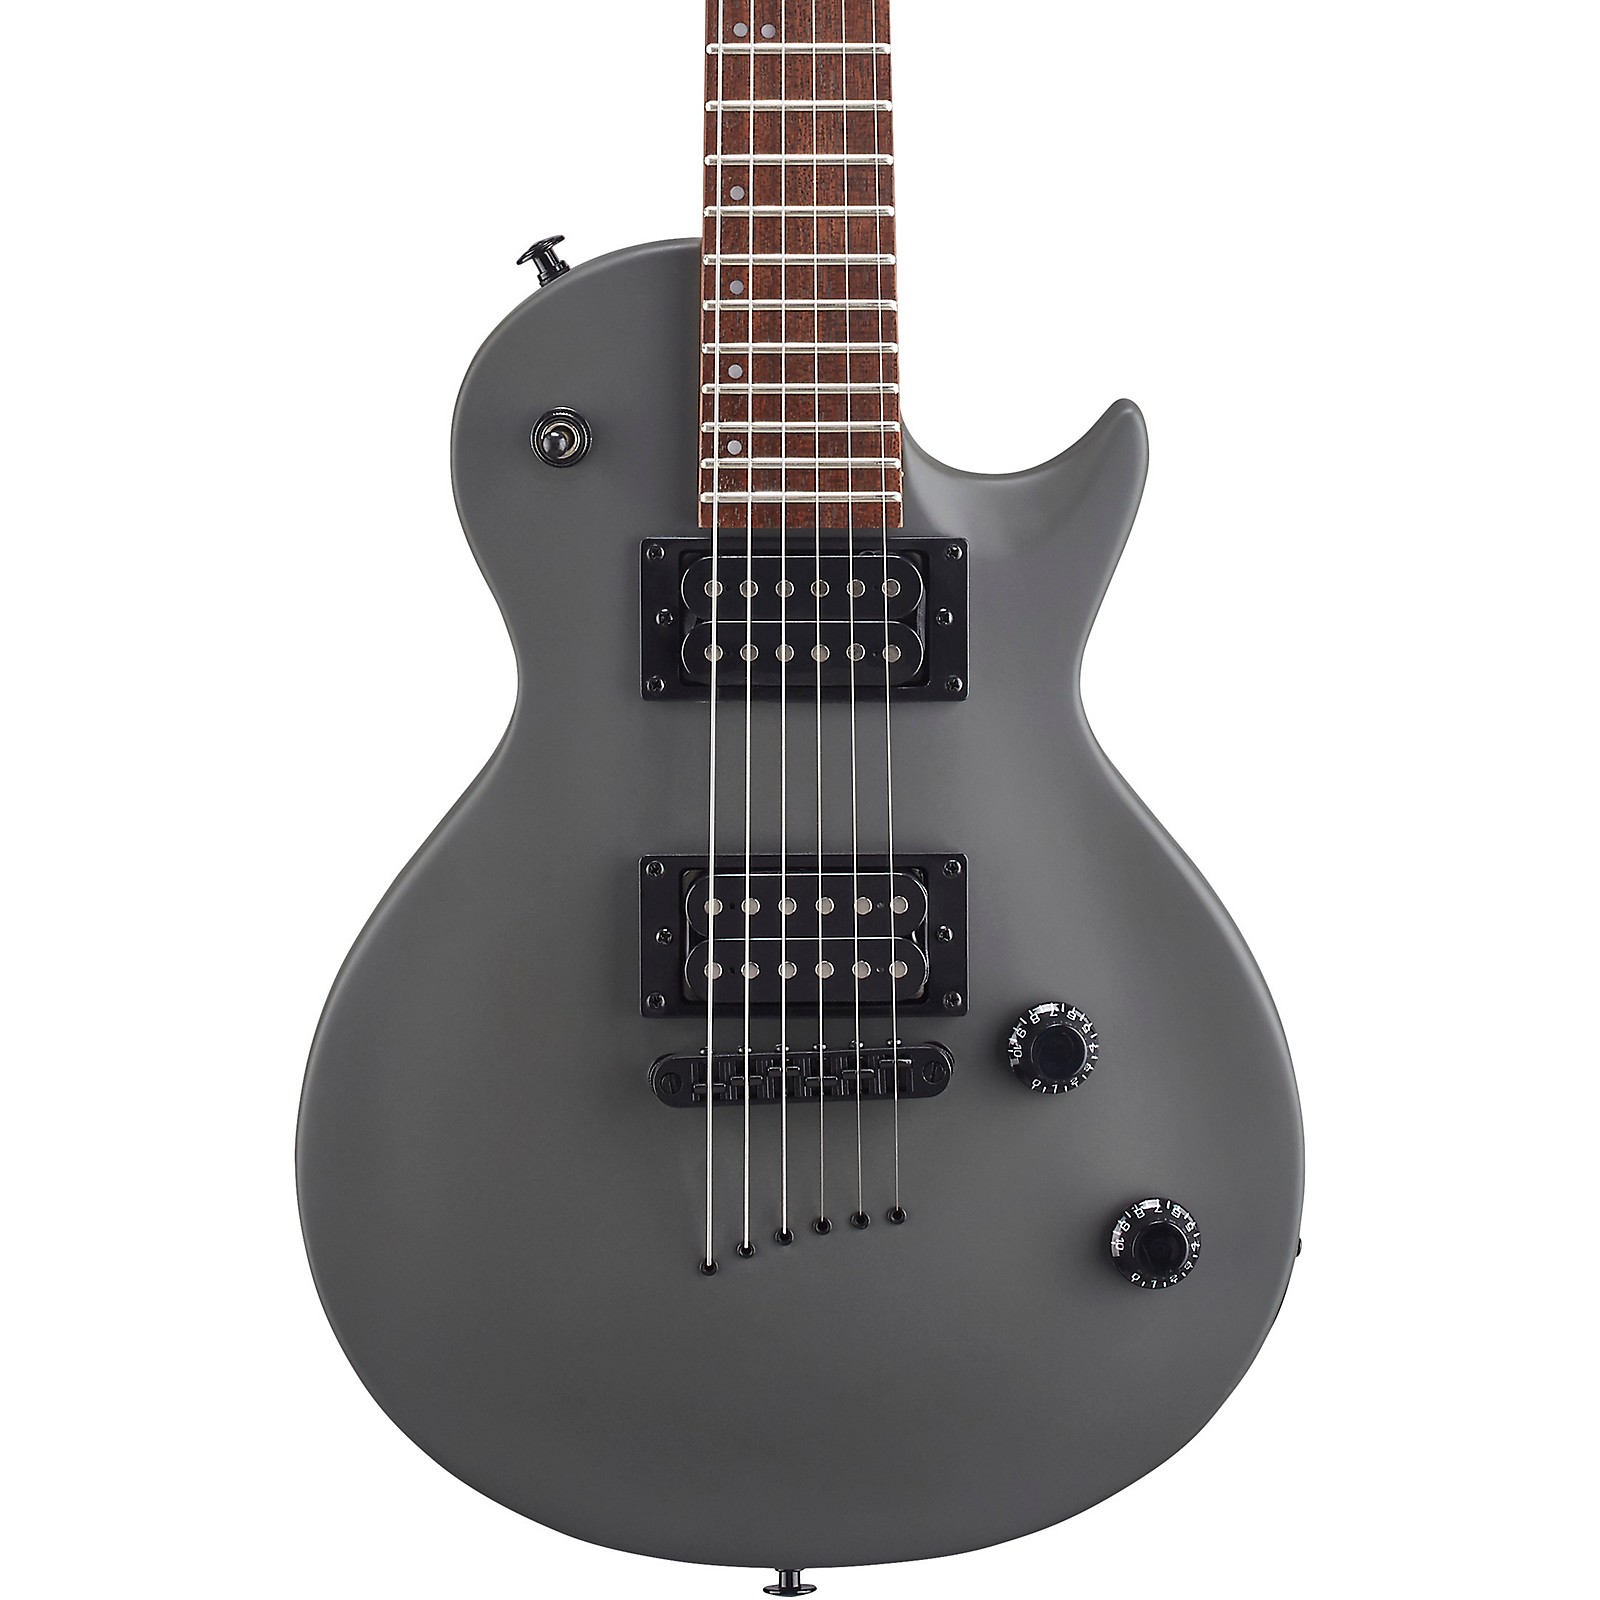 https://media.musiciansfriend.com/is/image/MMGS7/MS100-Short-Scale-Electric-Guitar-Charcoal-Satin/L25688000001000-00-1600x1600.jpg